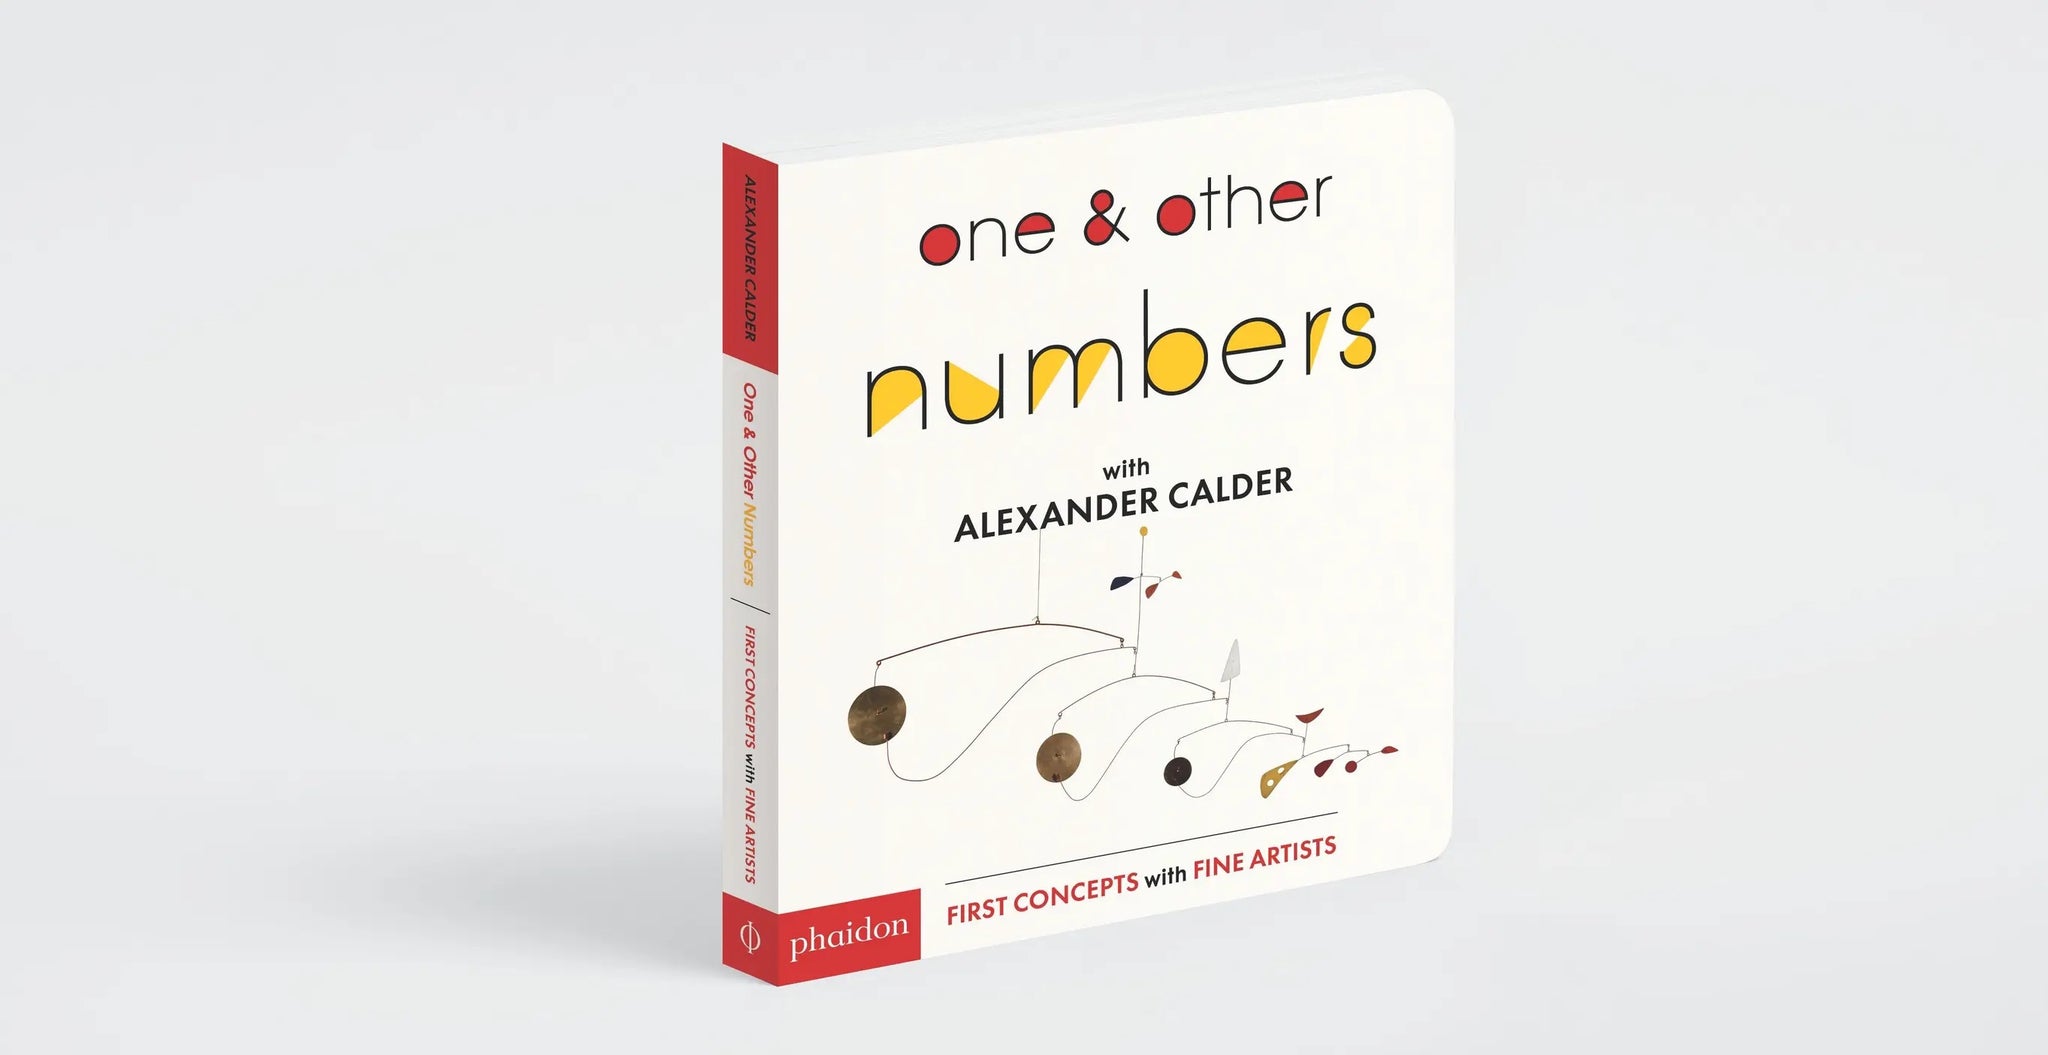 one & other numbers